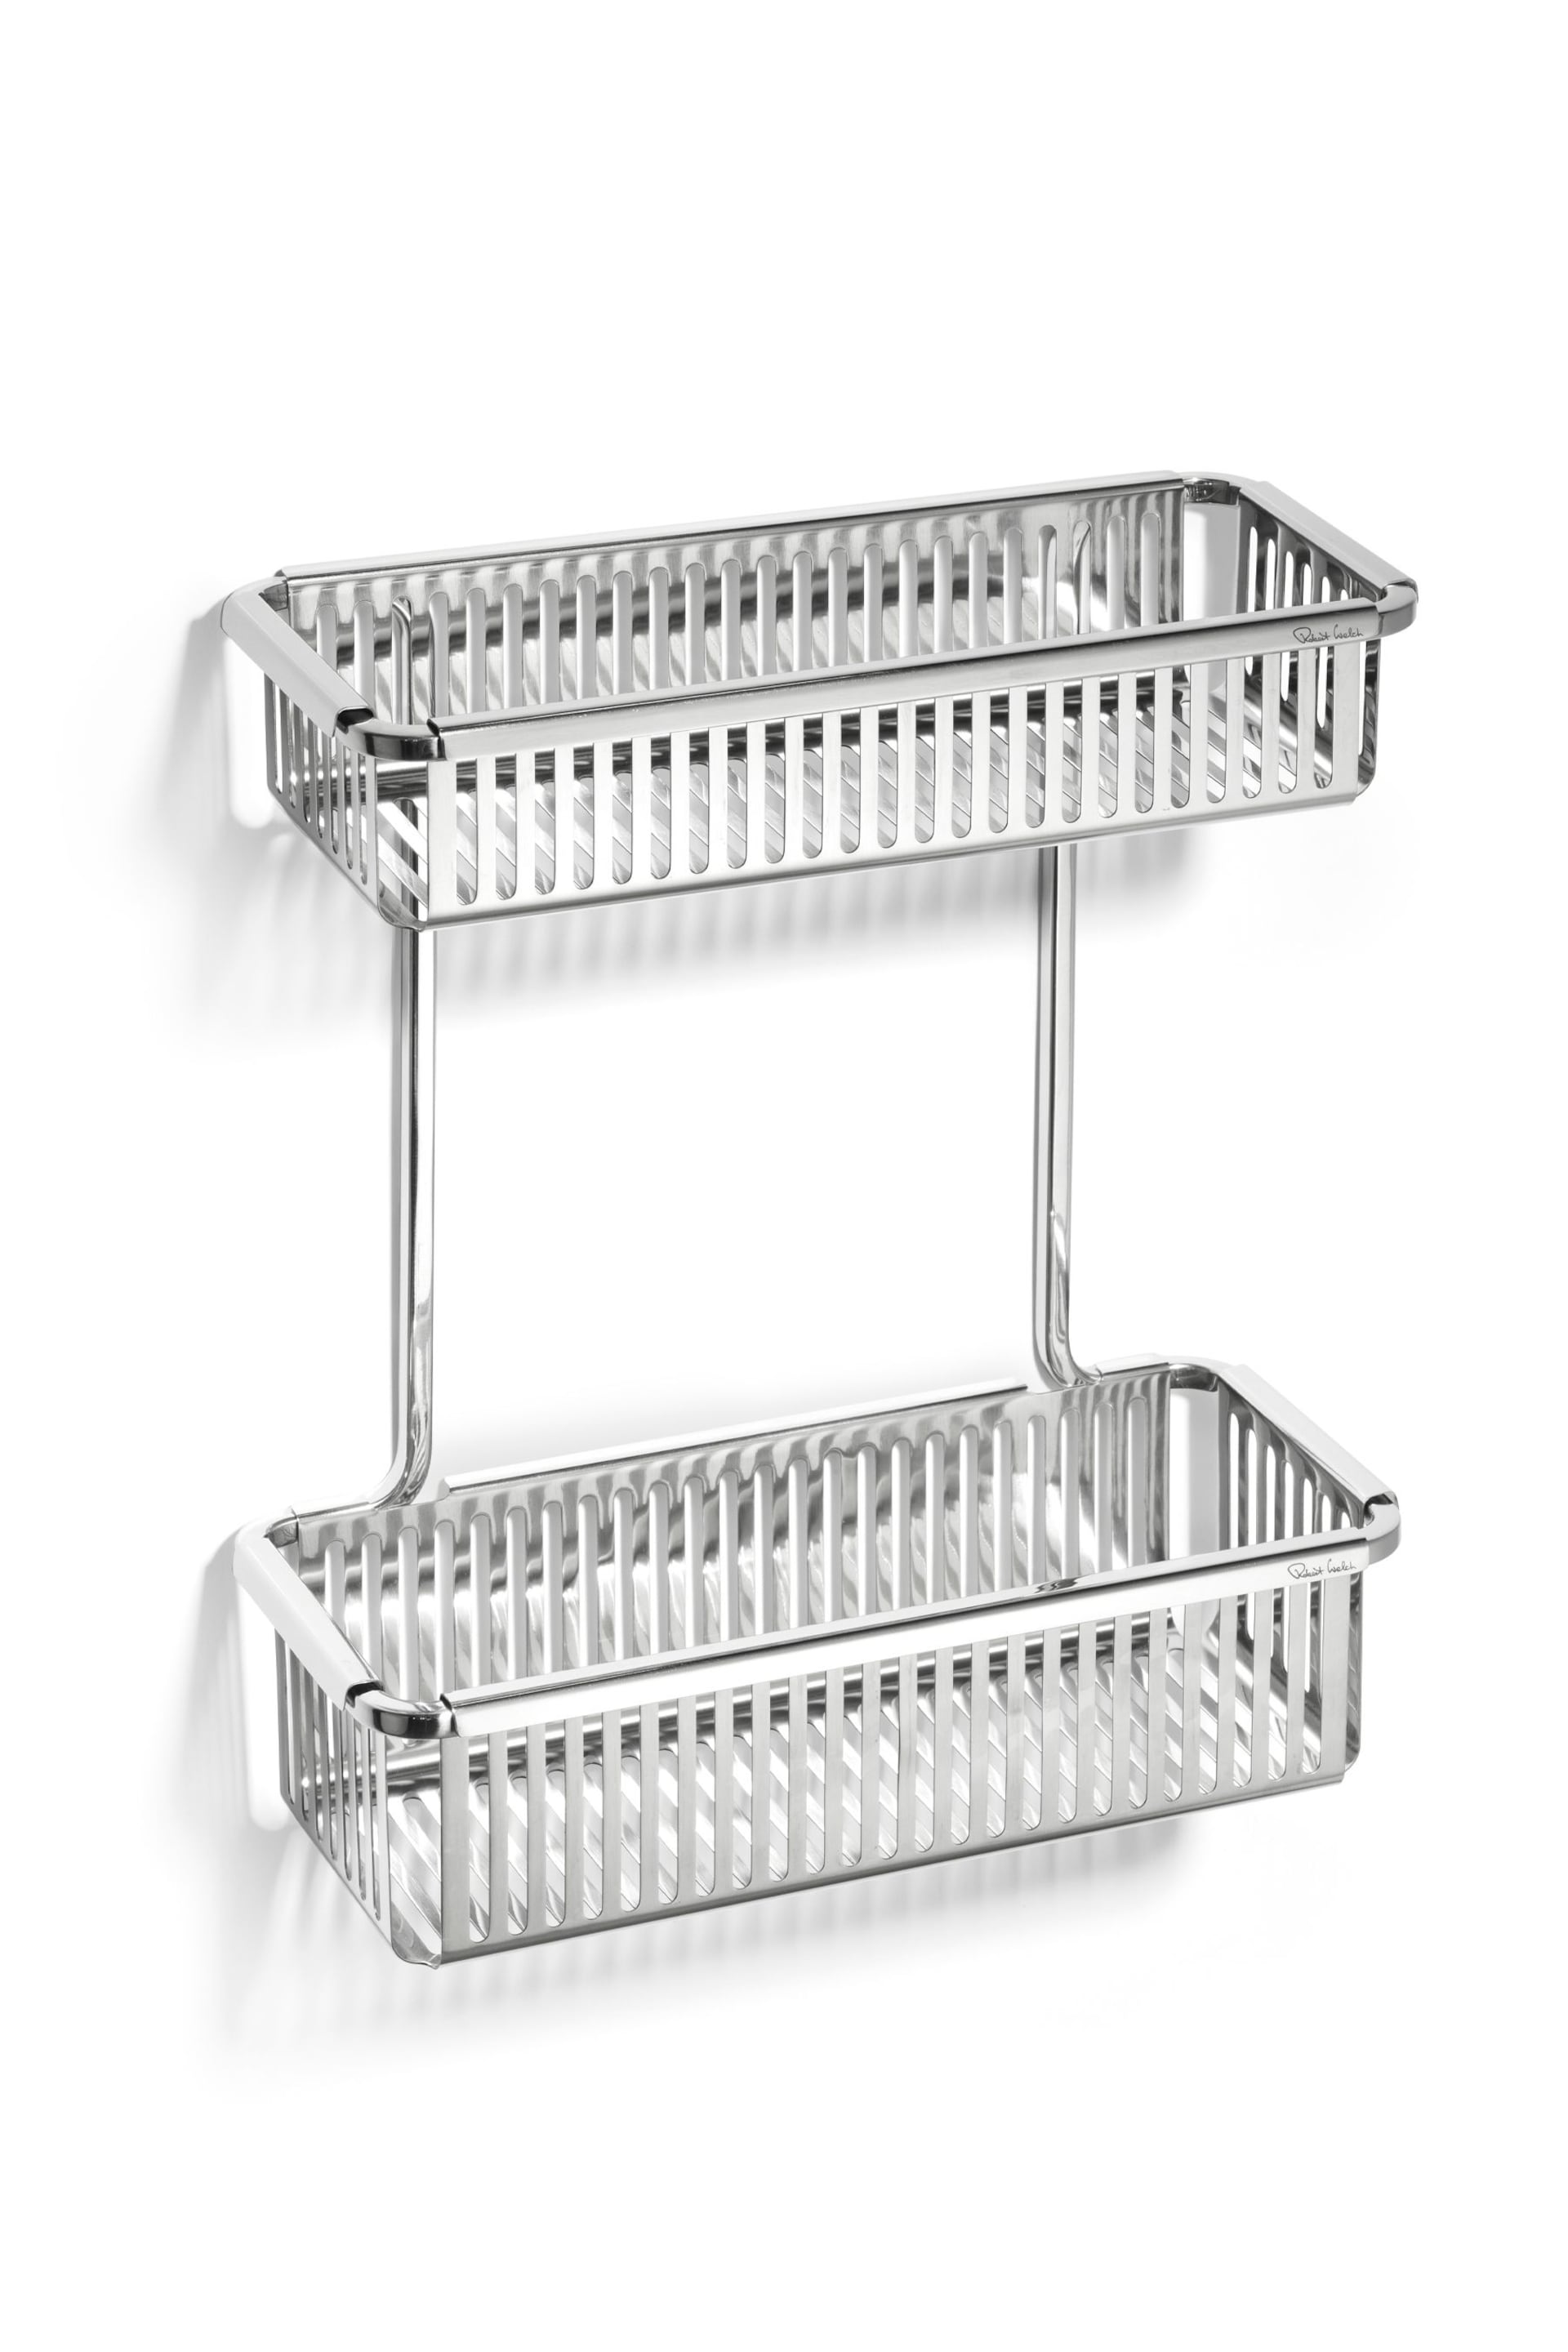 Robert Welch Silver Burford Shower Double Basket - Image 3 of 4